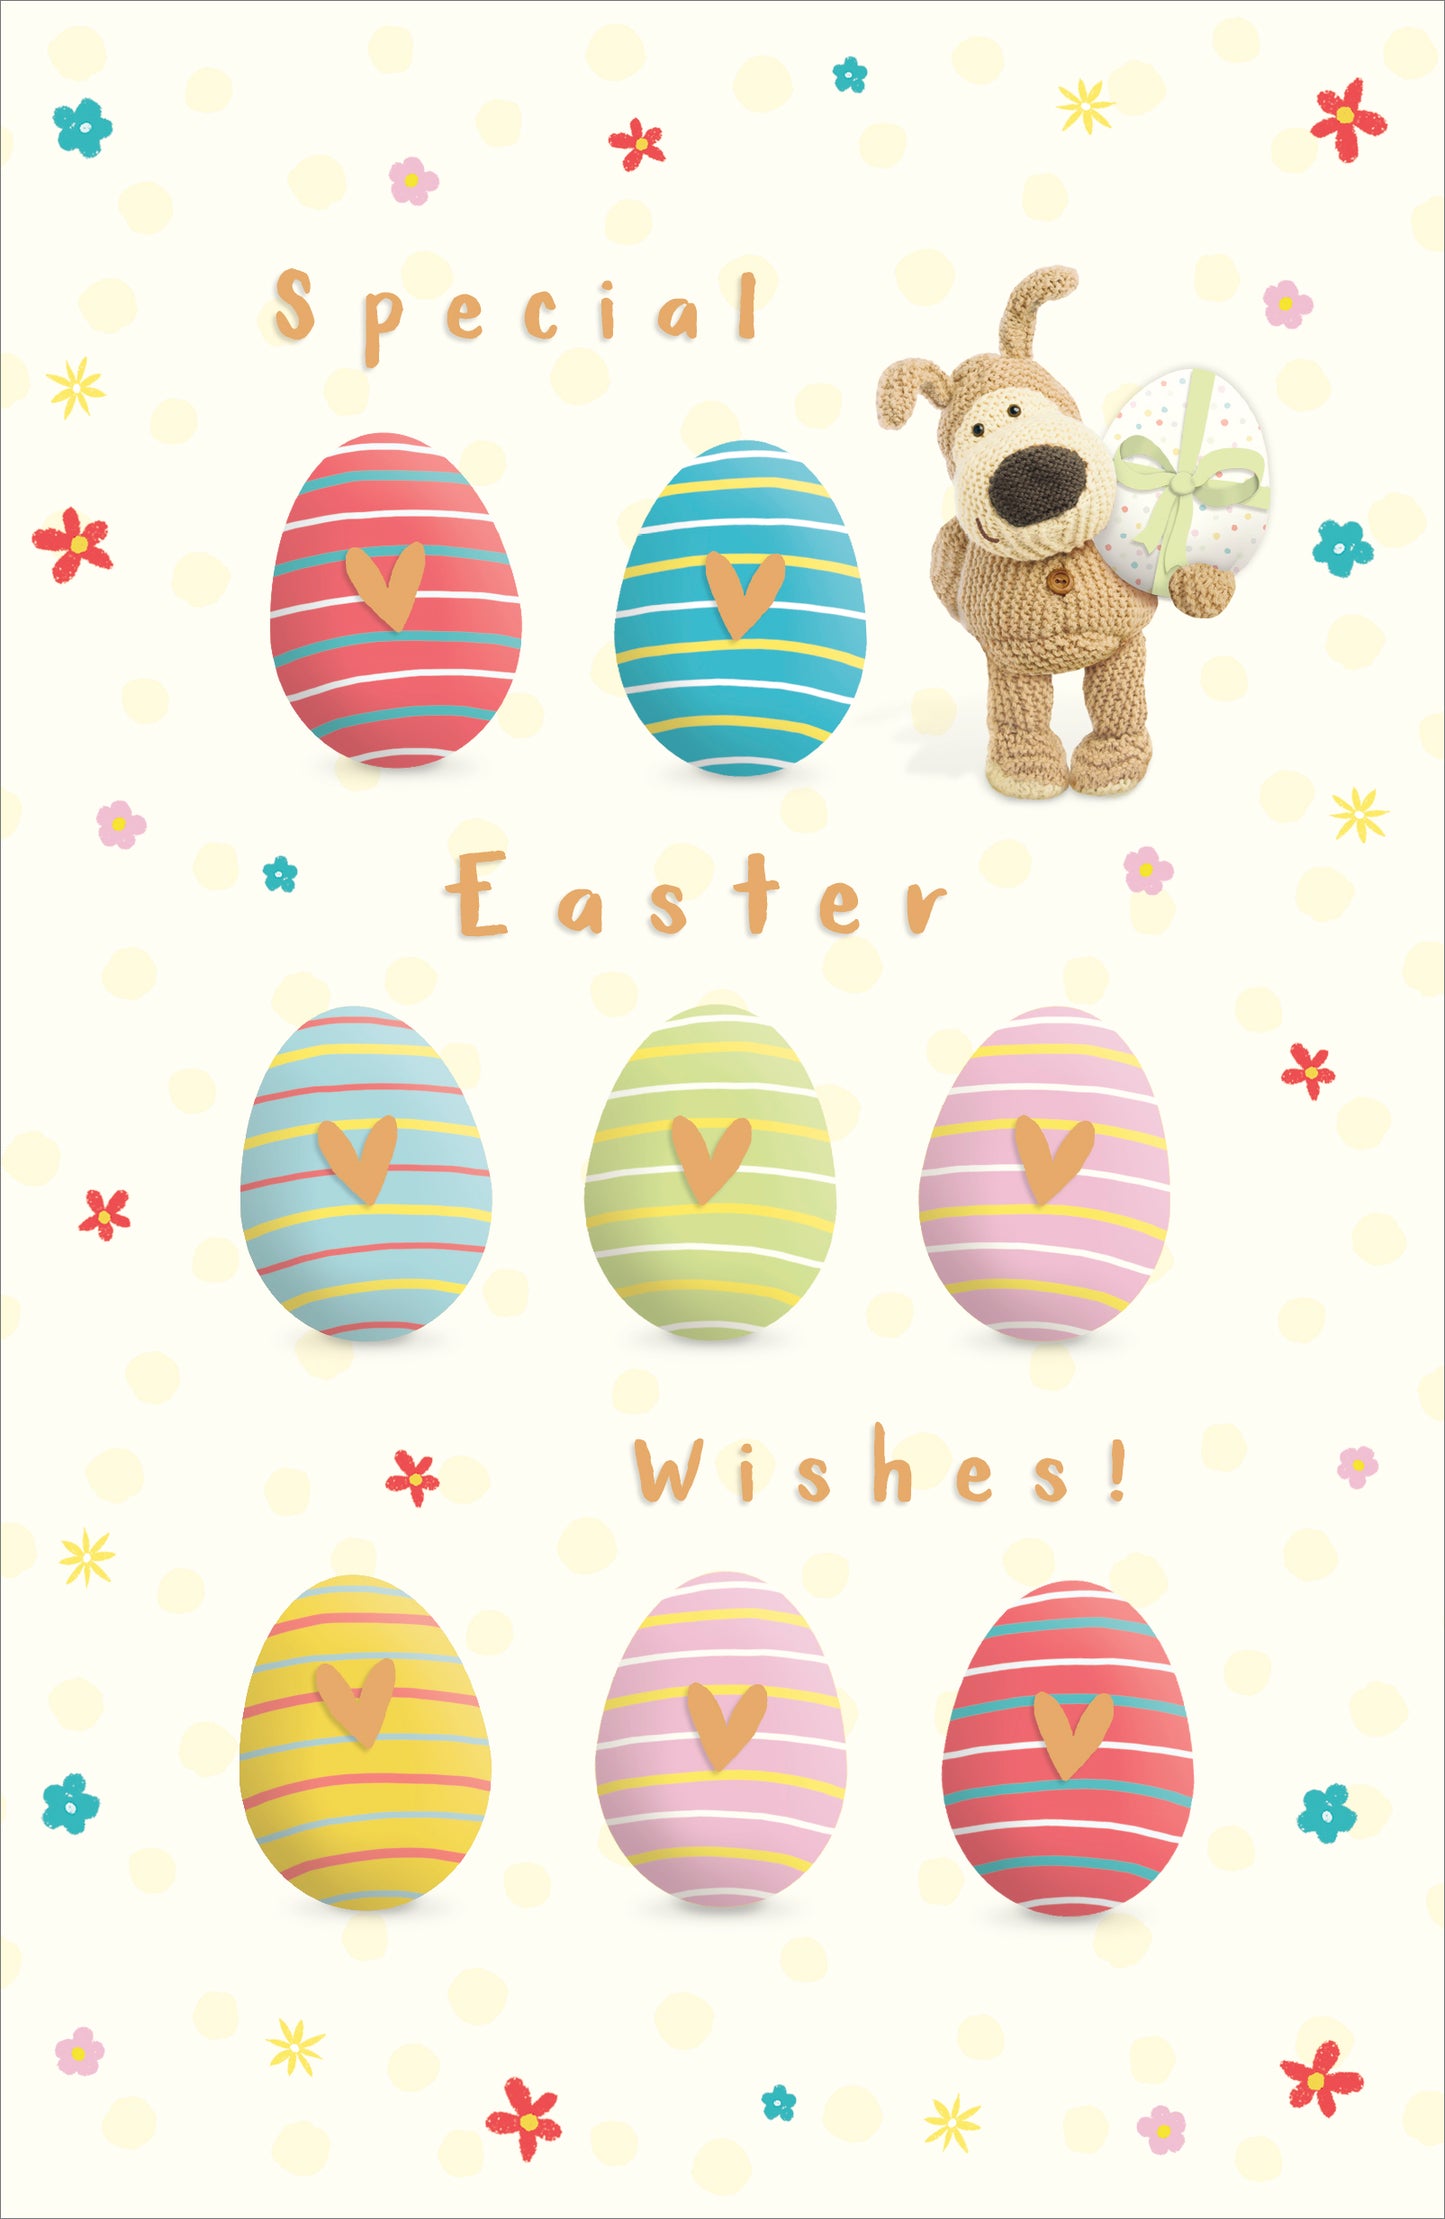 Boofle Easter Wishes Egg-cellent Gifts Easter Card Cute Greeting Card